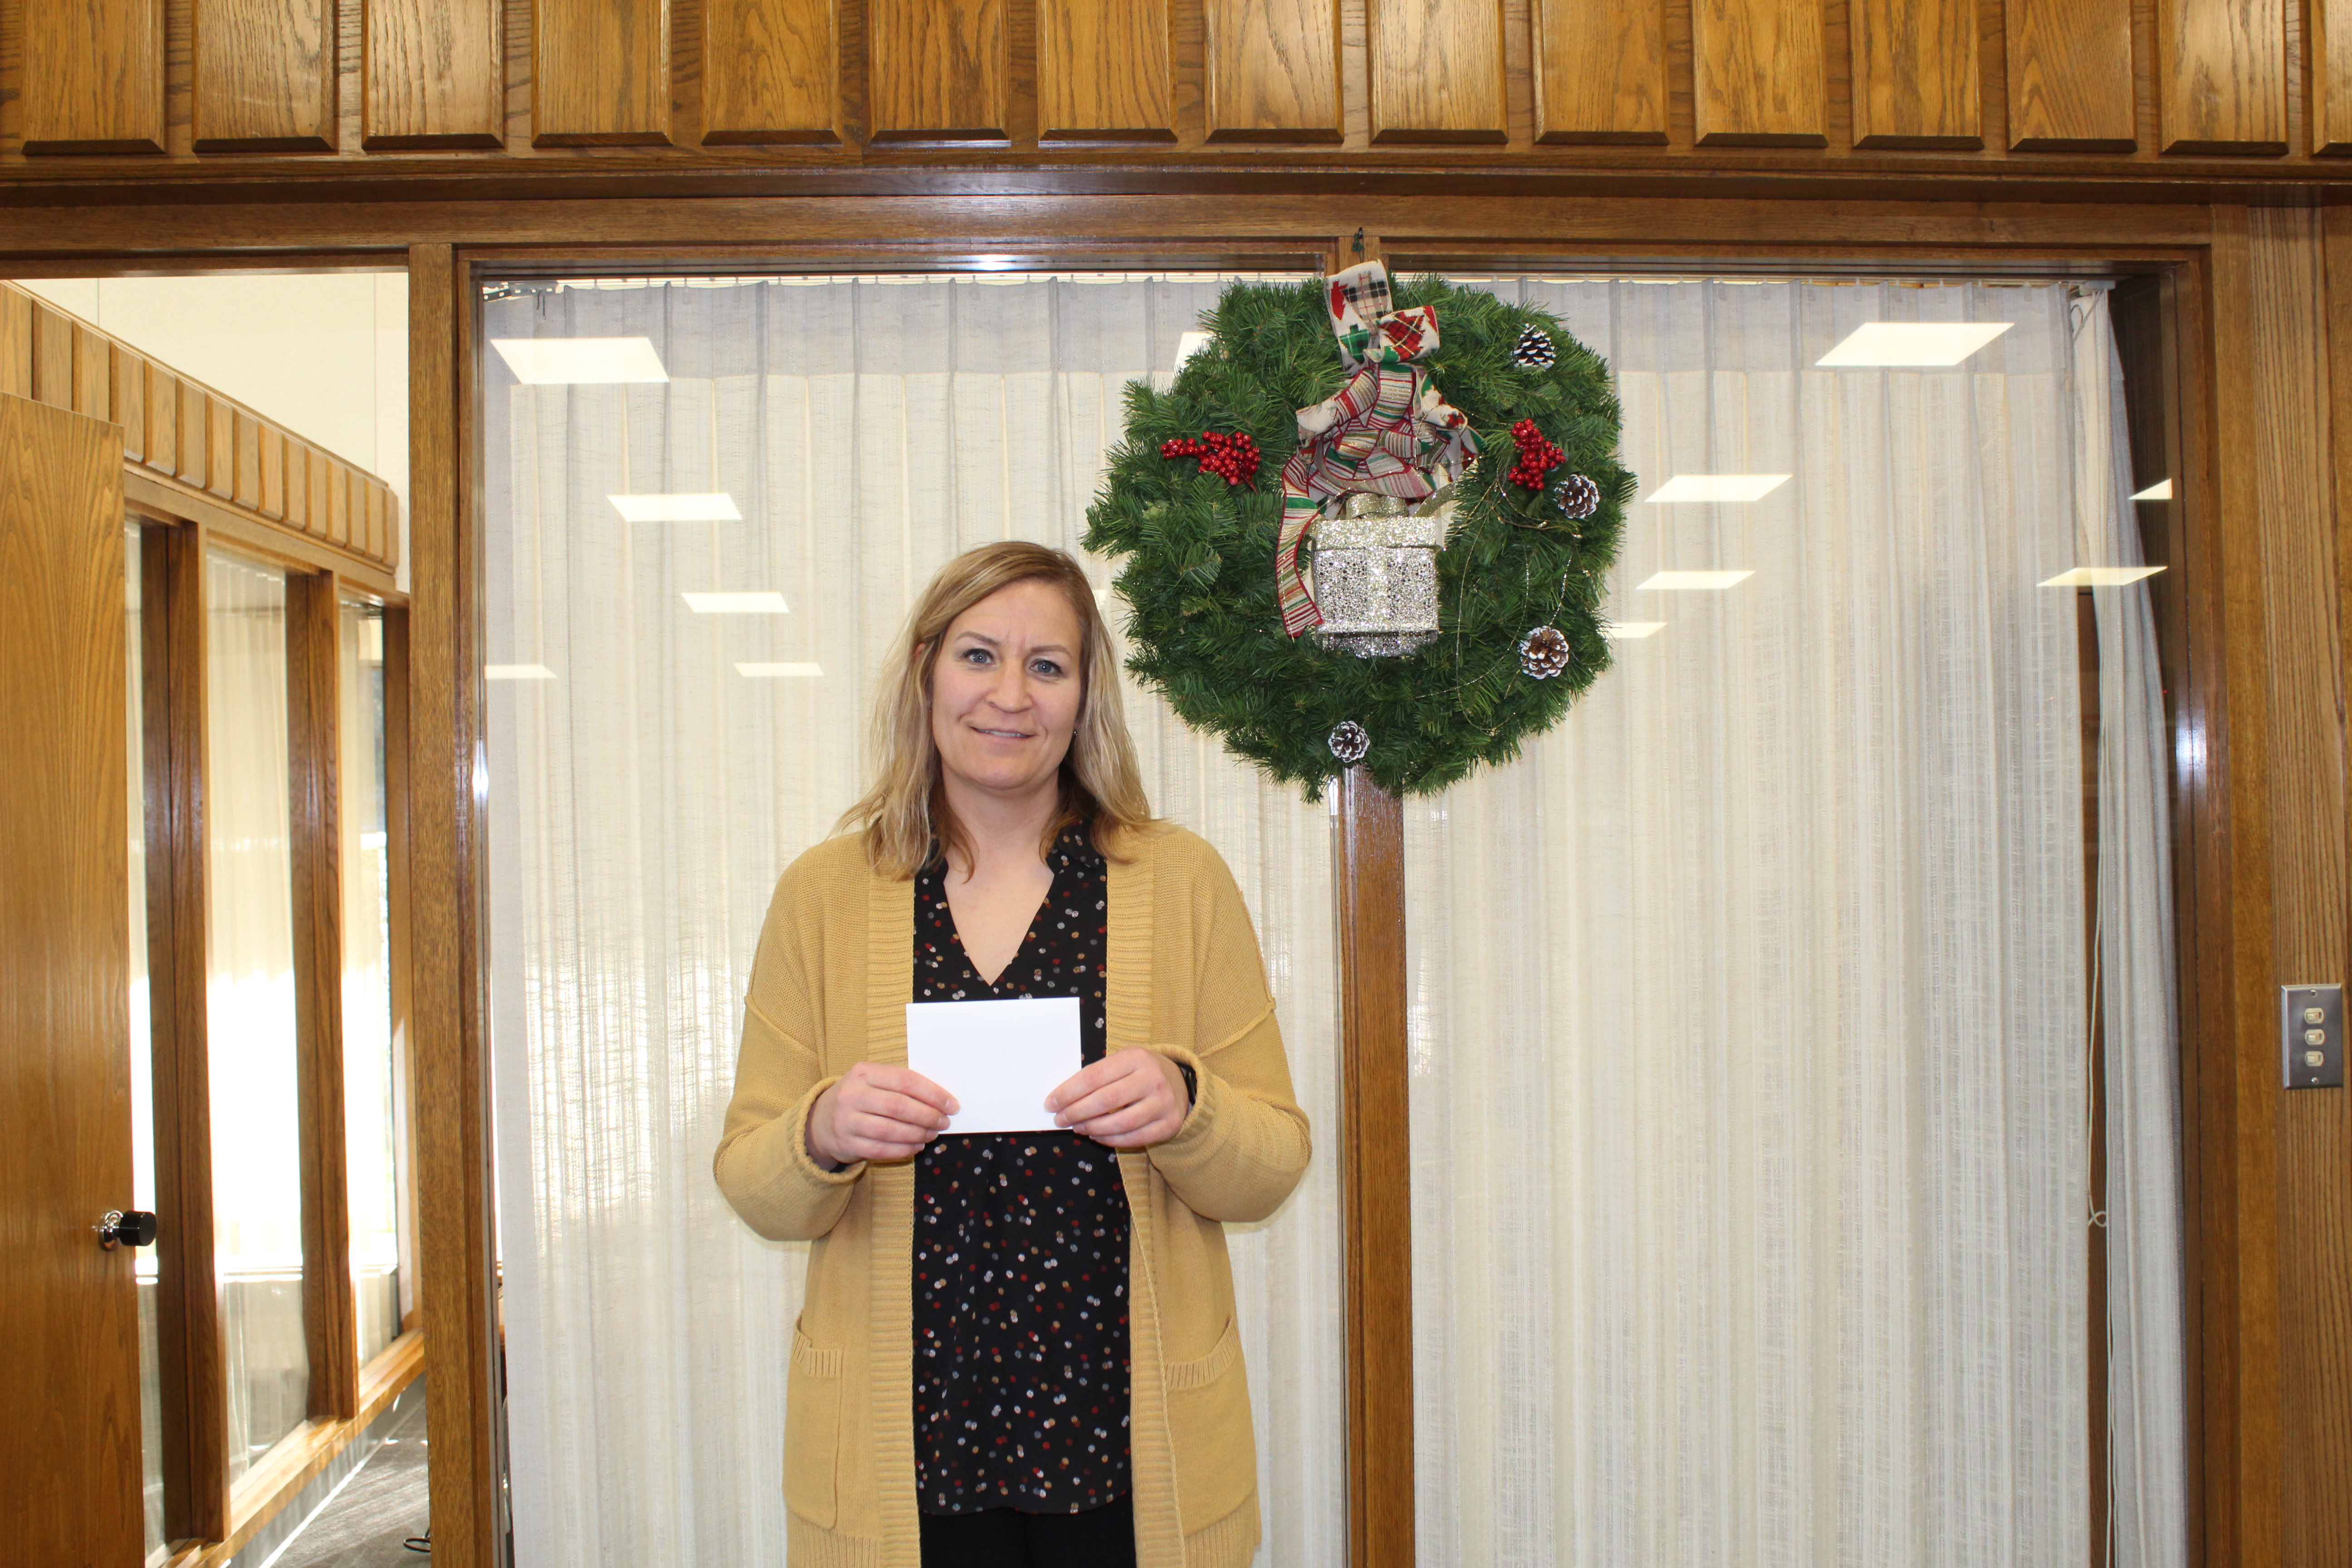 Winner Catherine A. from Security Financial Bank